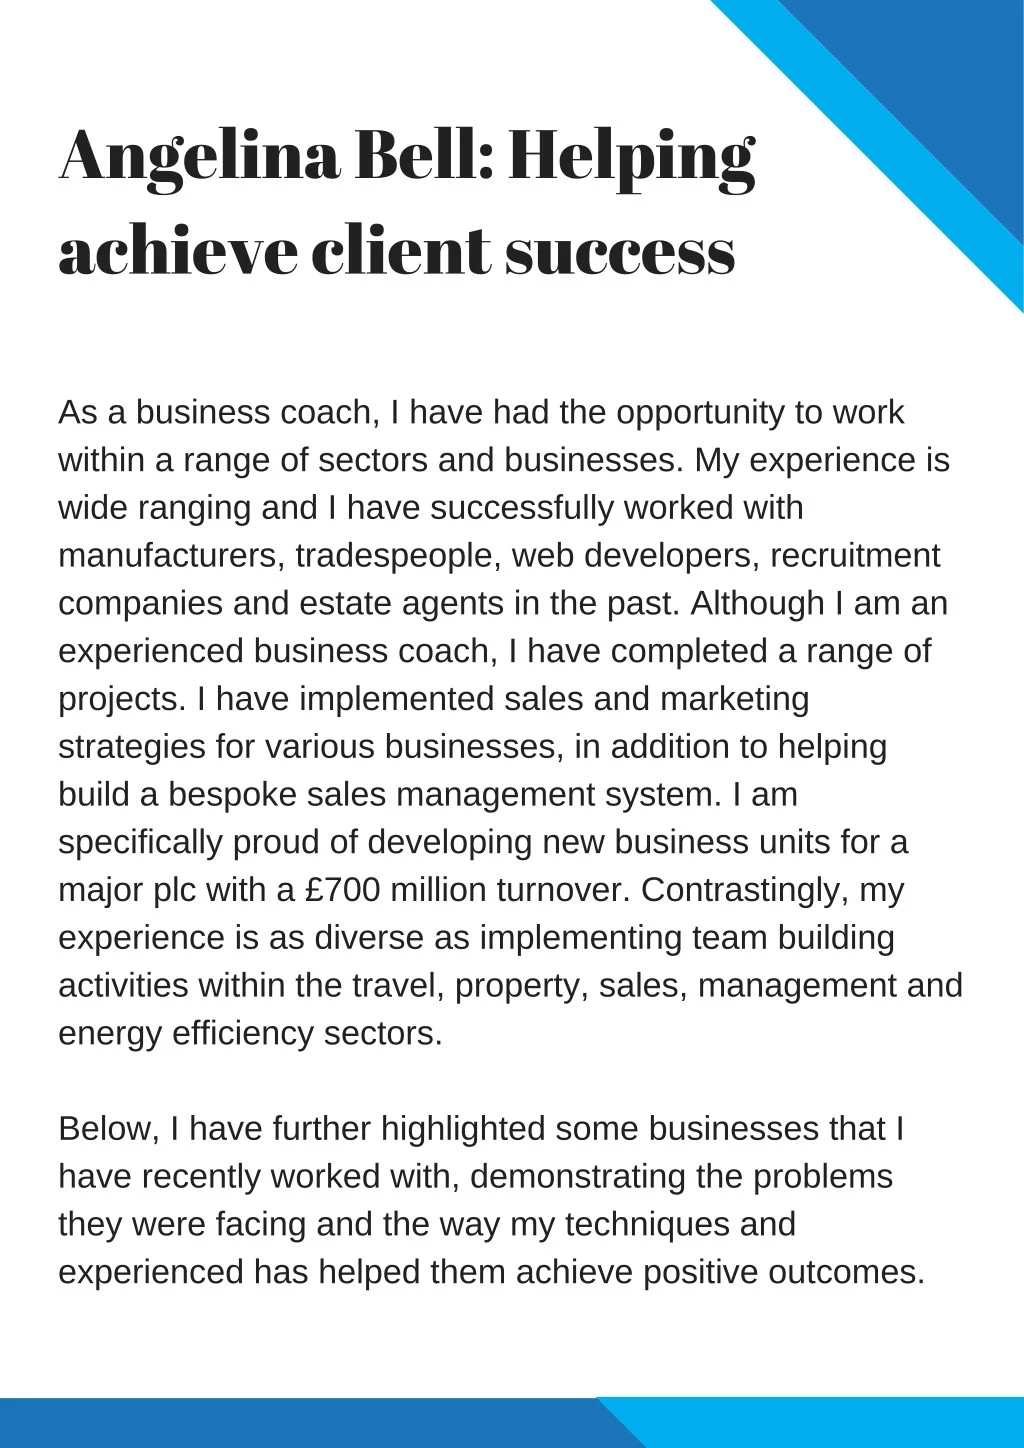 angelina bell helping achieve client success